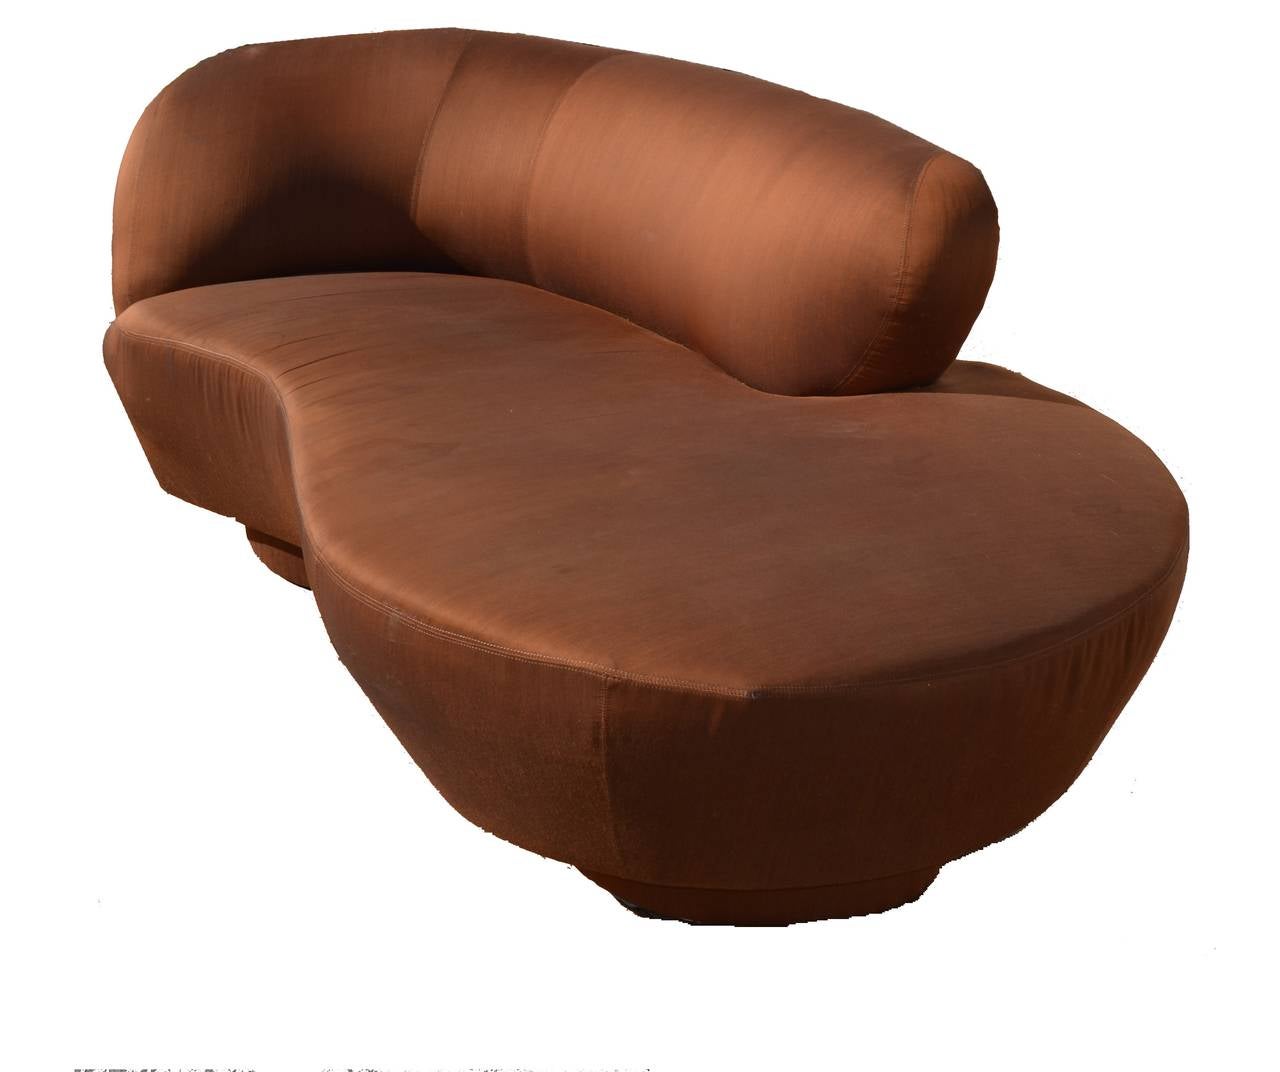 Simultaneously hip and sophisticated, this is a Mid-Century free-form cloud petite sofa or fainting coach by Vladimir Kagan. This size is perfect for a bedroom or smaller space. Original fabric bronze/ombre color - sold as is - minor rip at base of